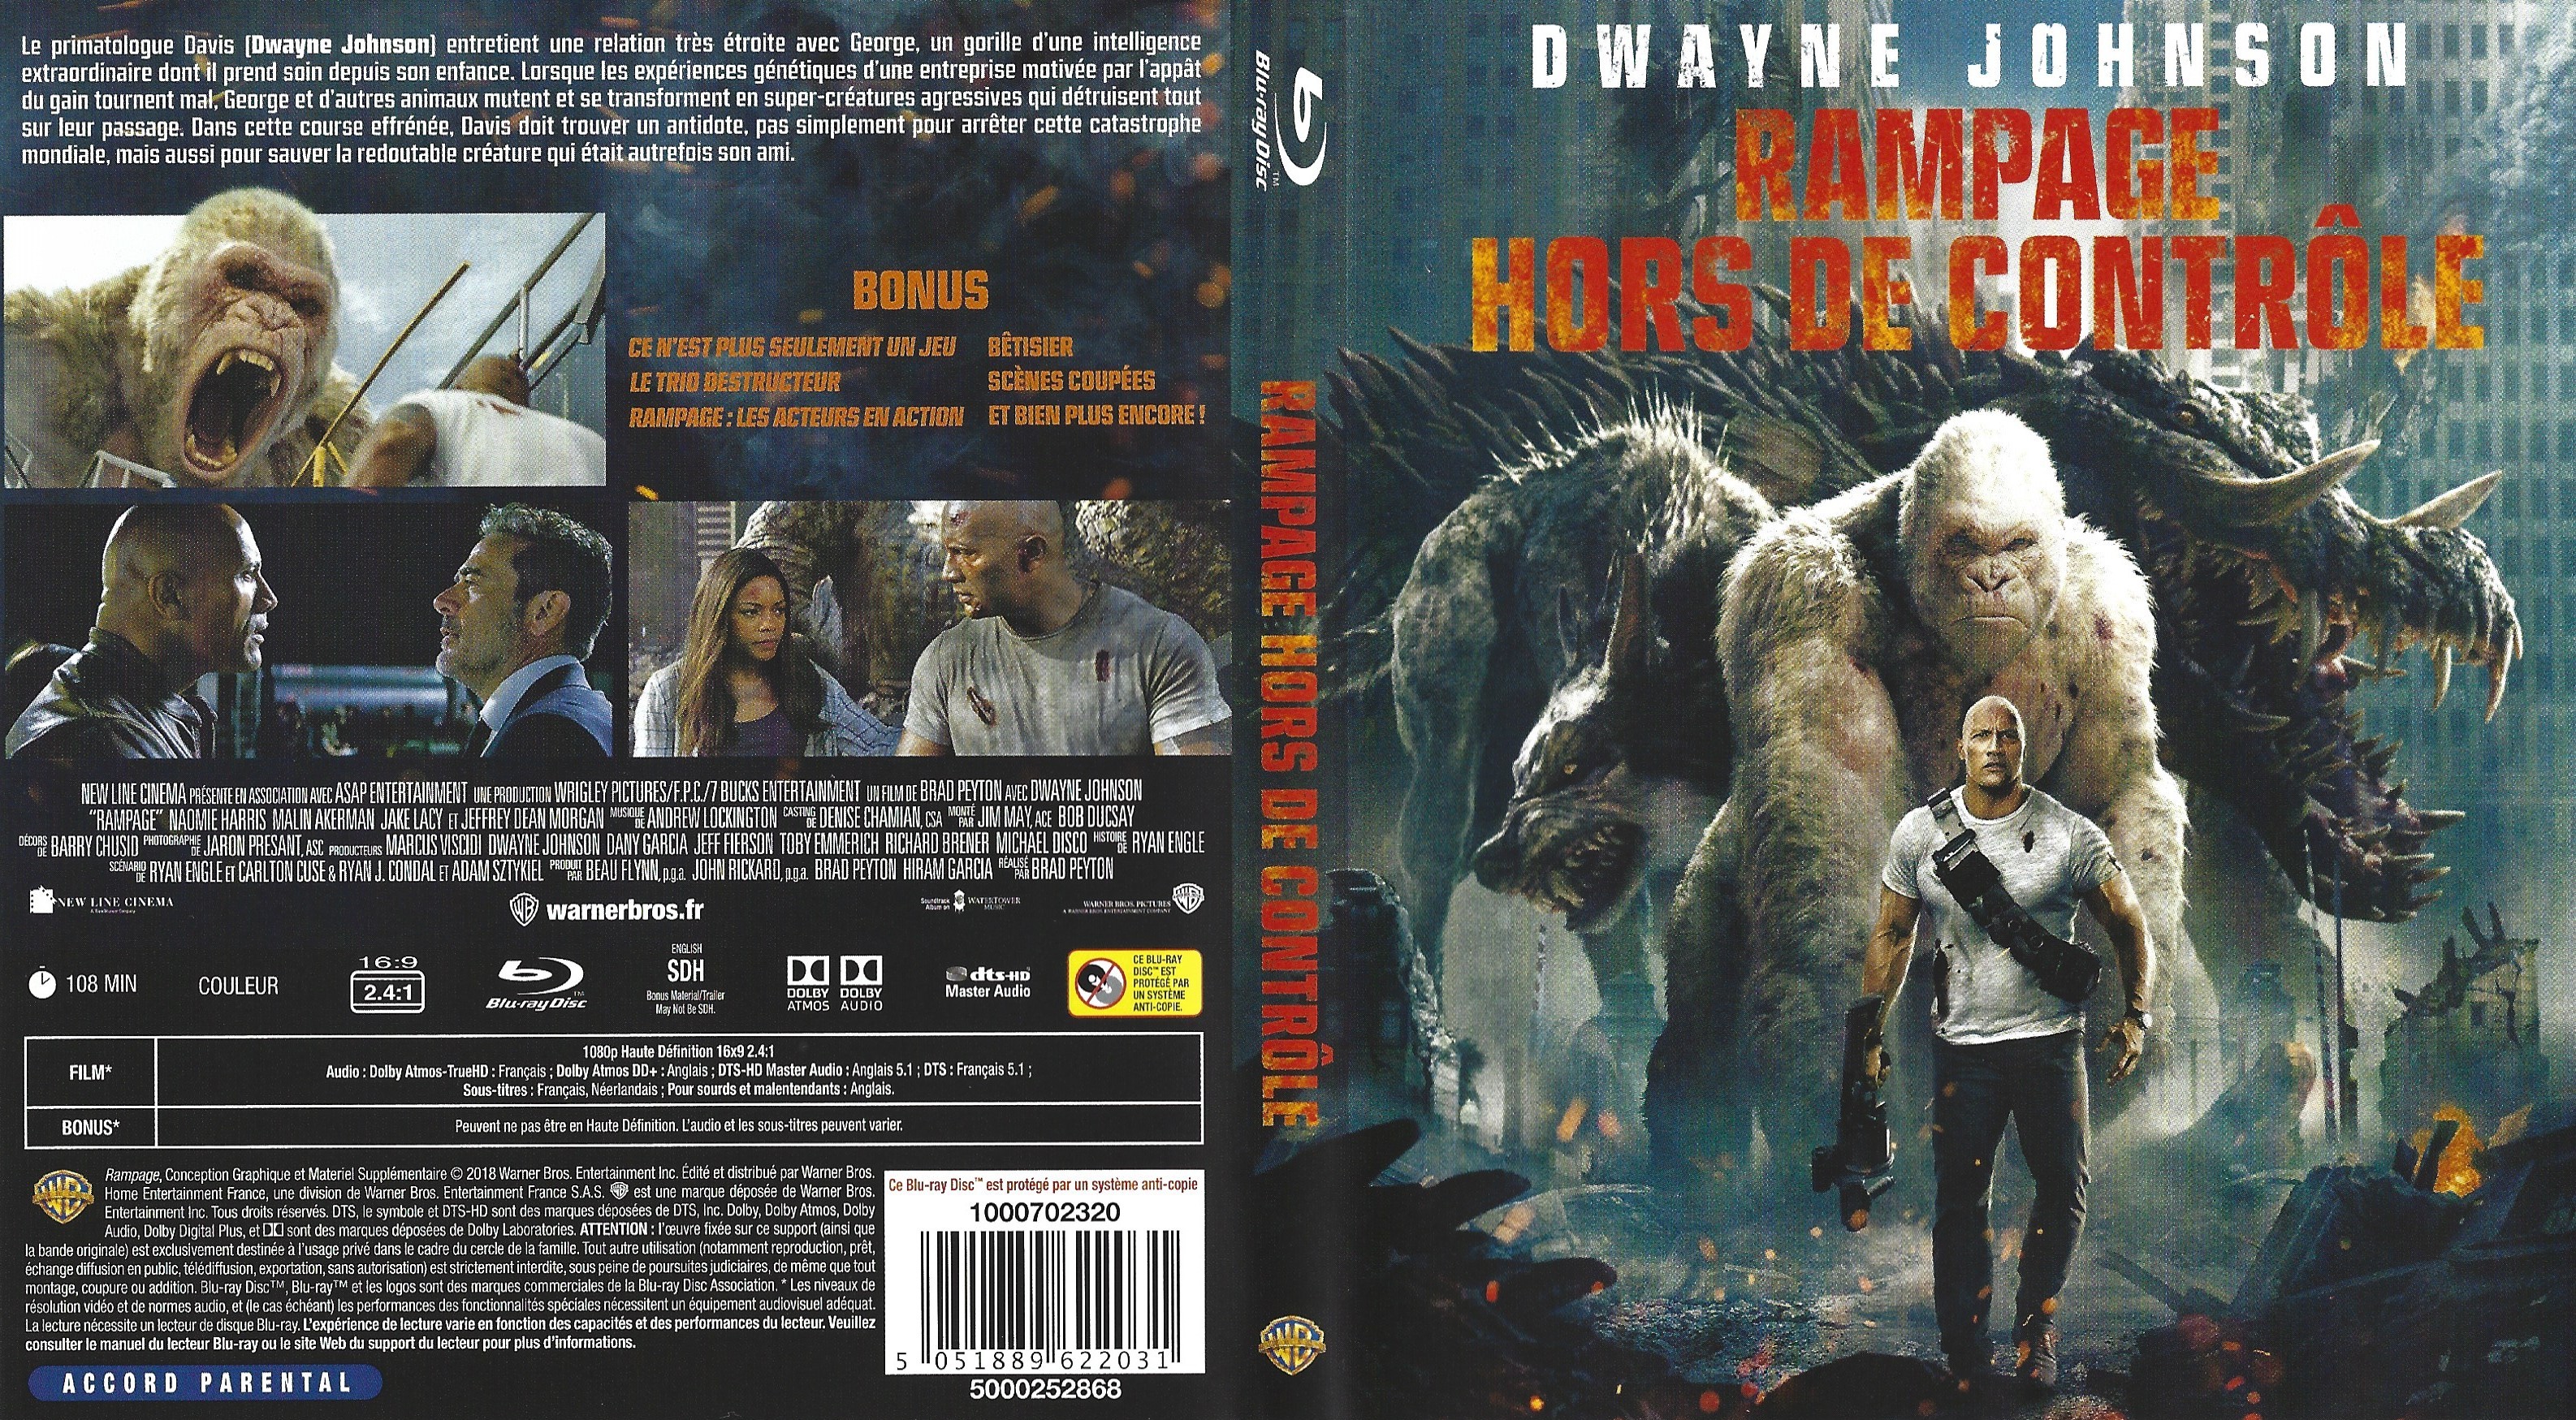 Jaquette DVD Rampage Hors De Controle (BLU-RAY)